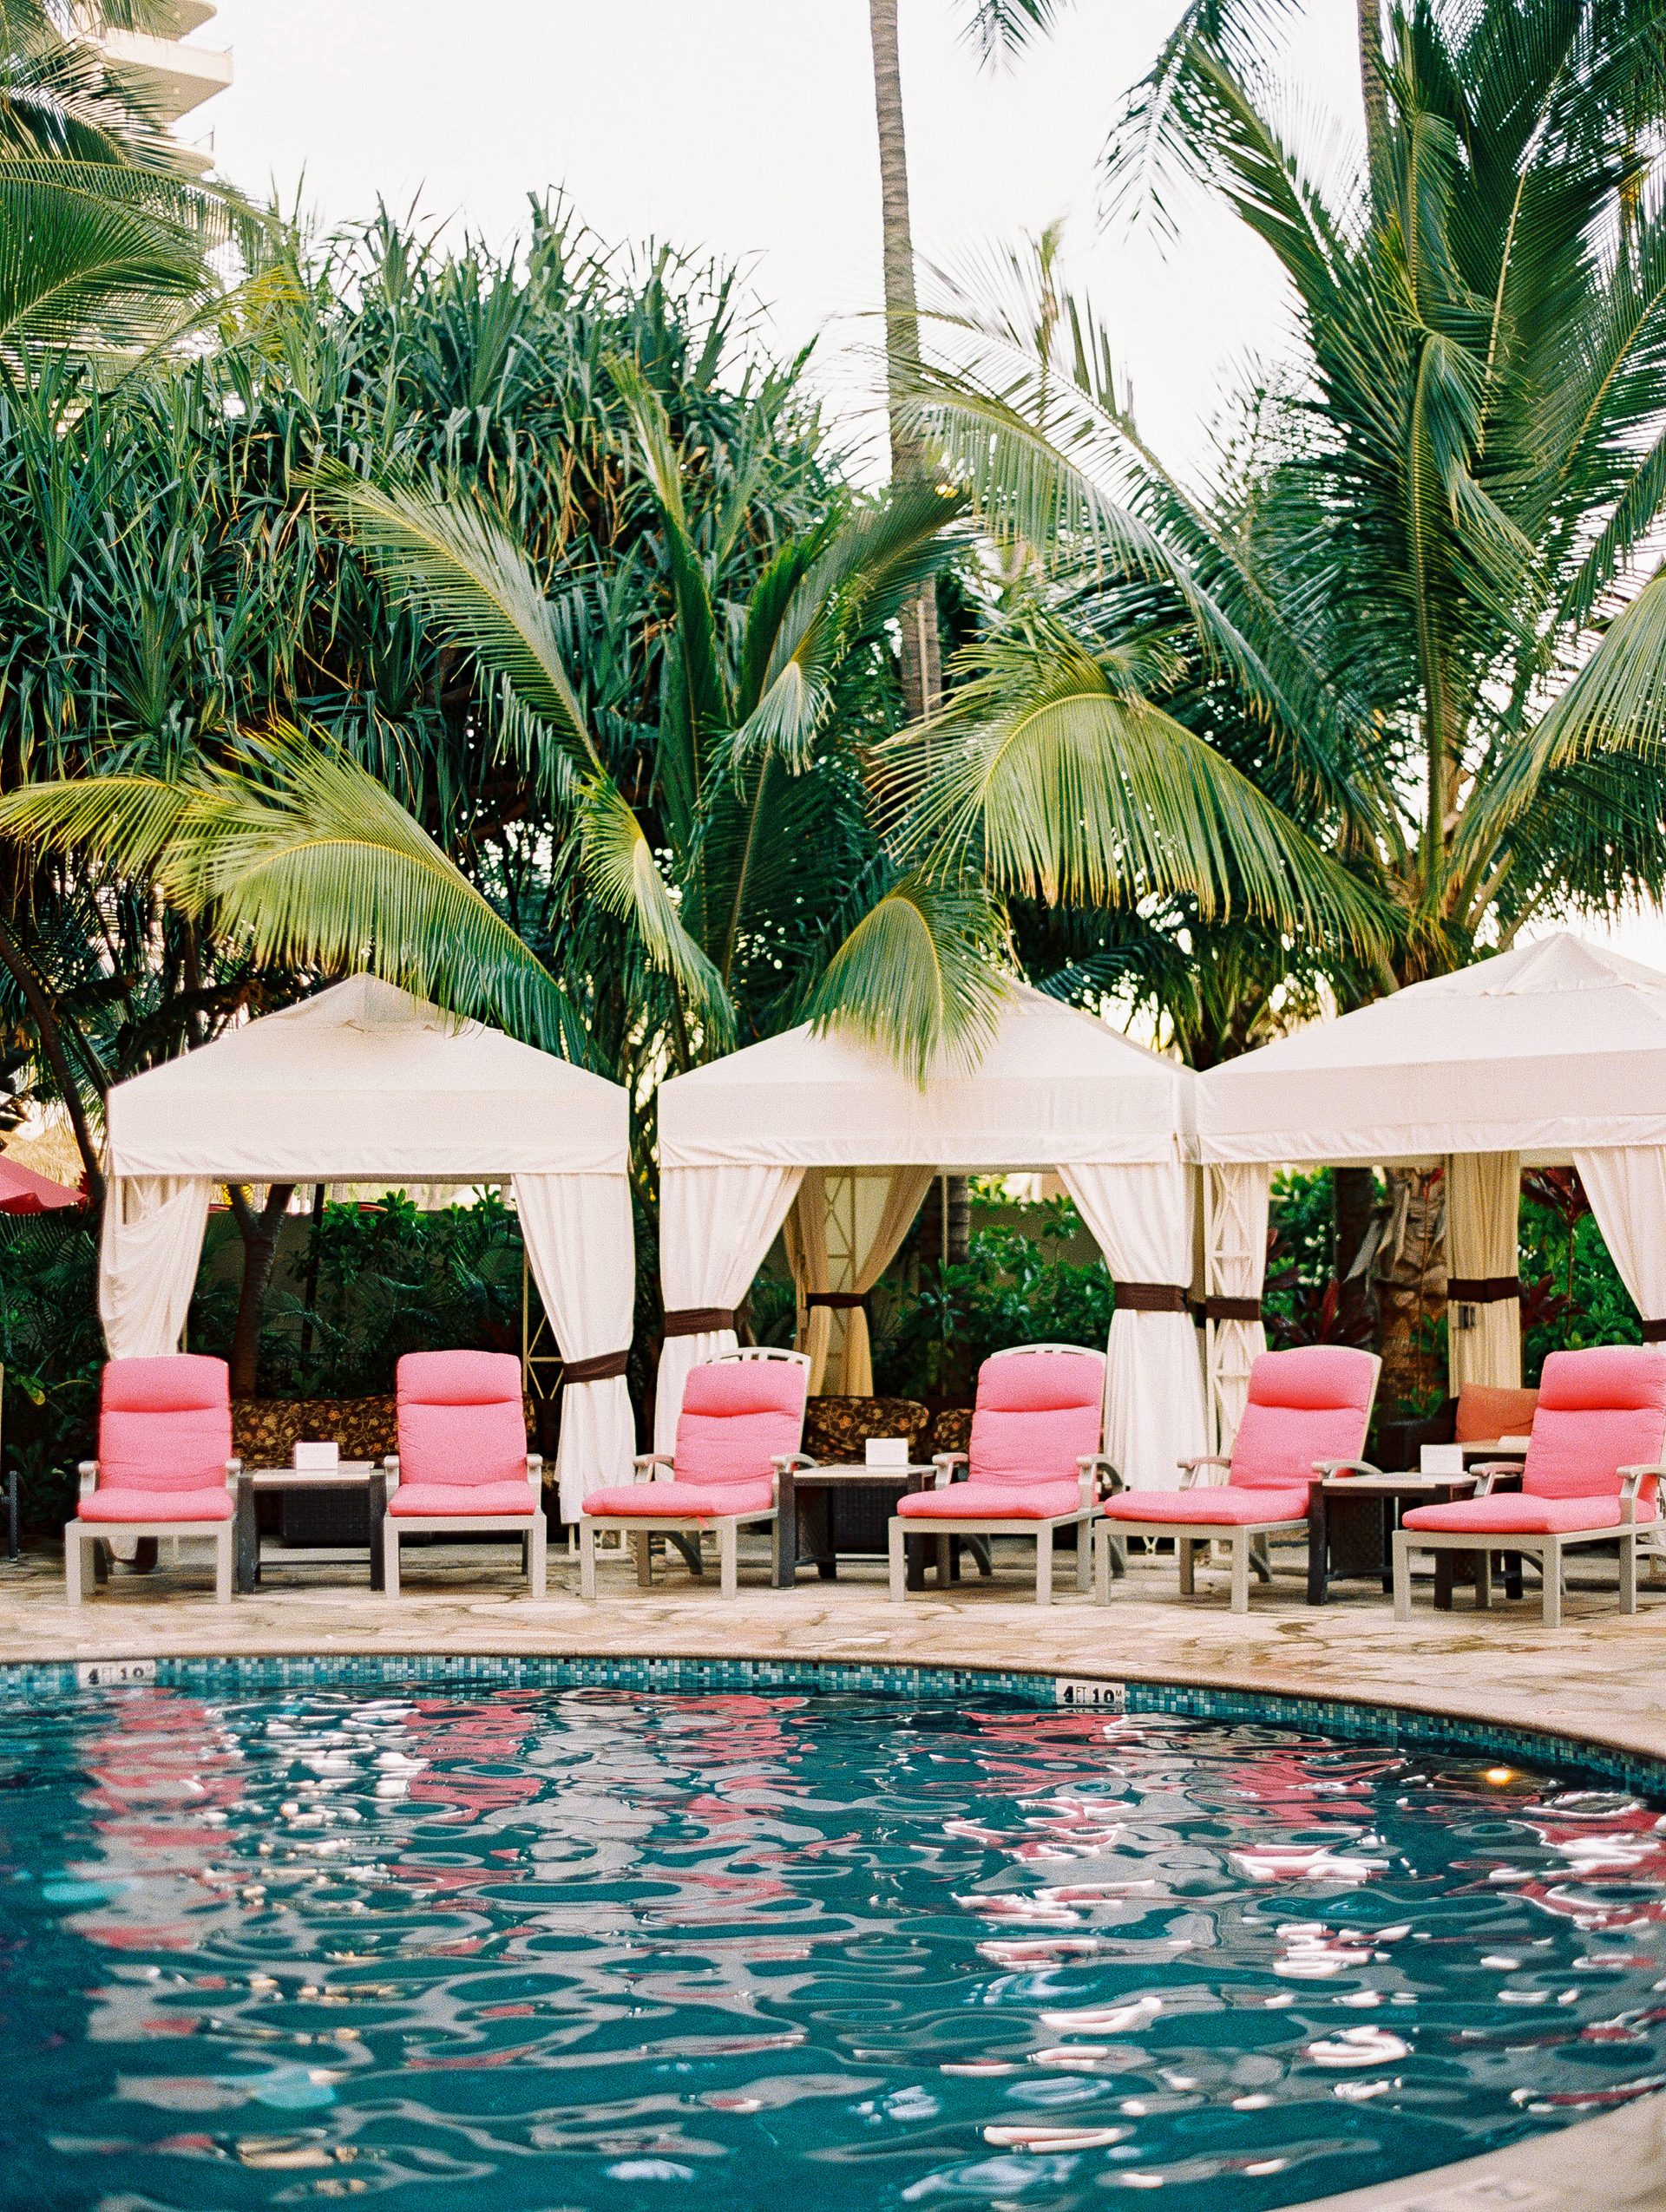 Pink chairs and poolside at a boutique hotel